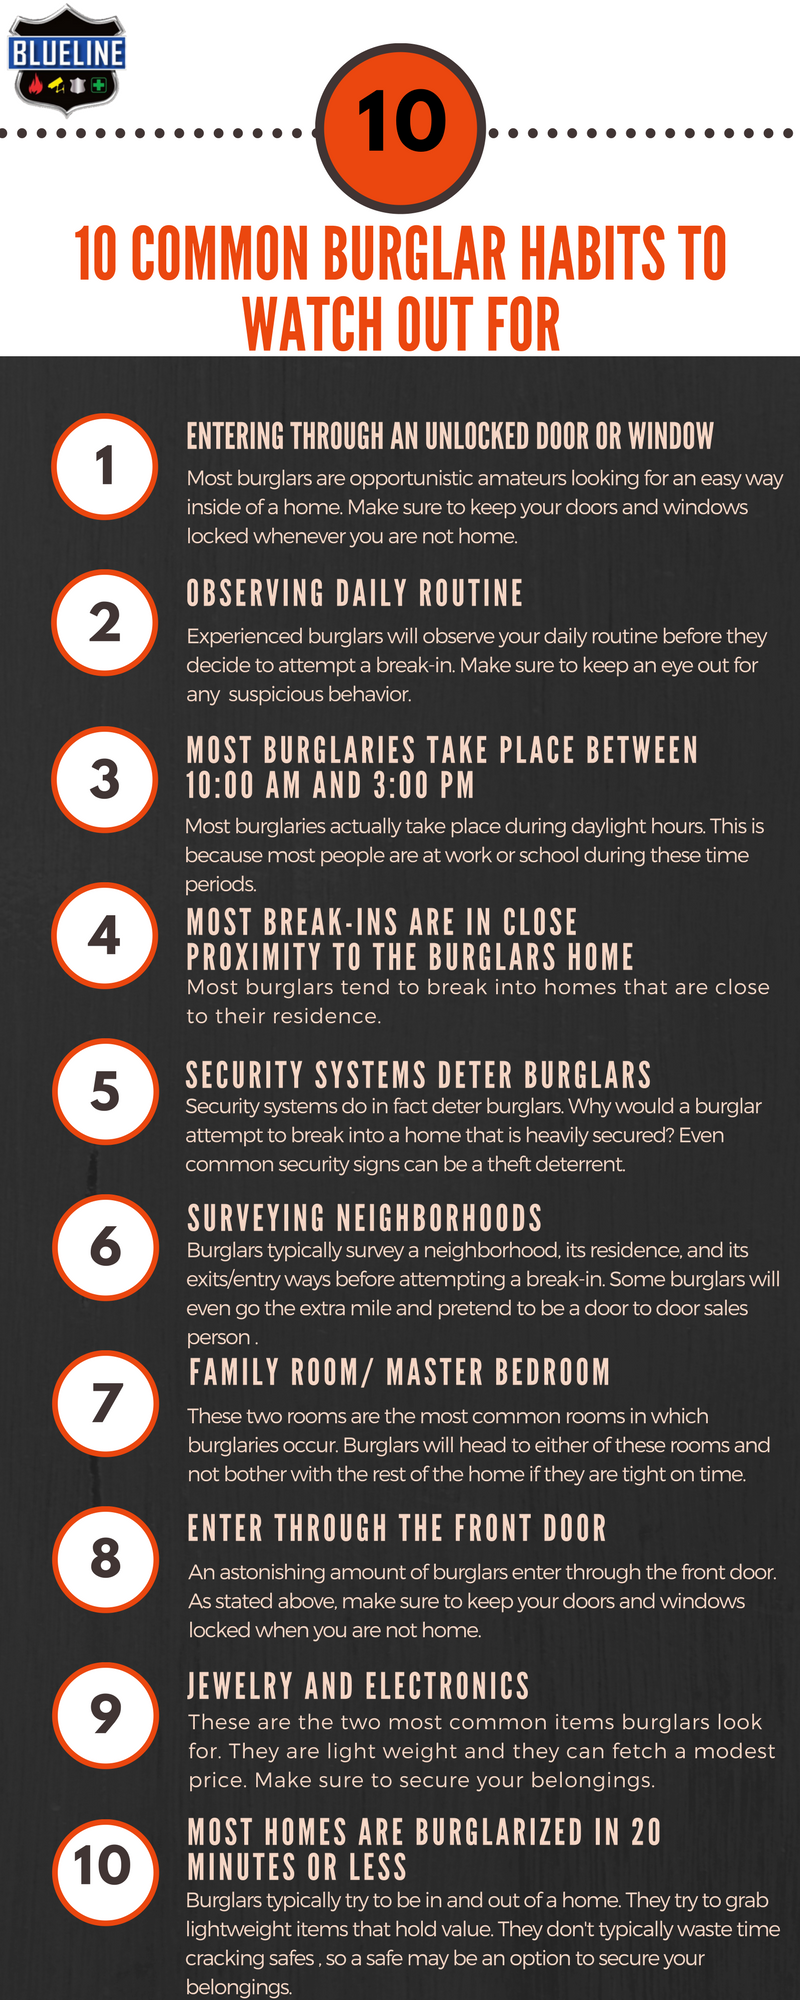 10 common burglar habits to watch out for